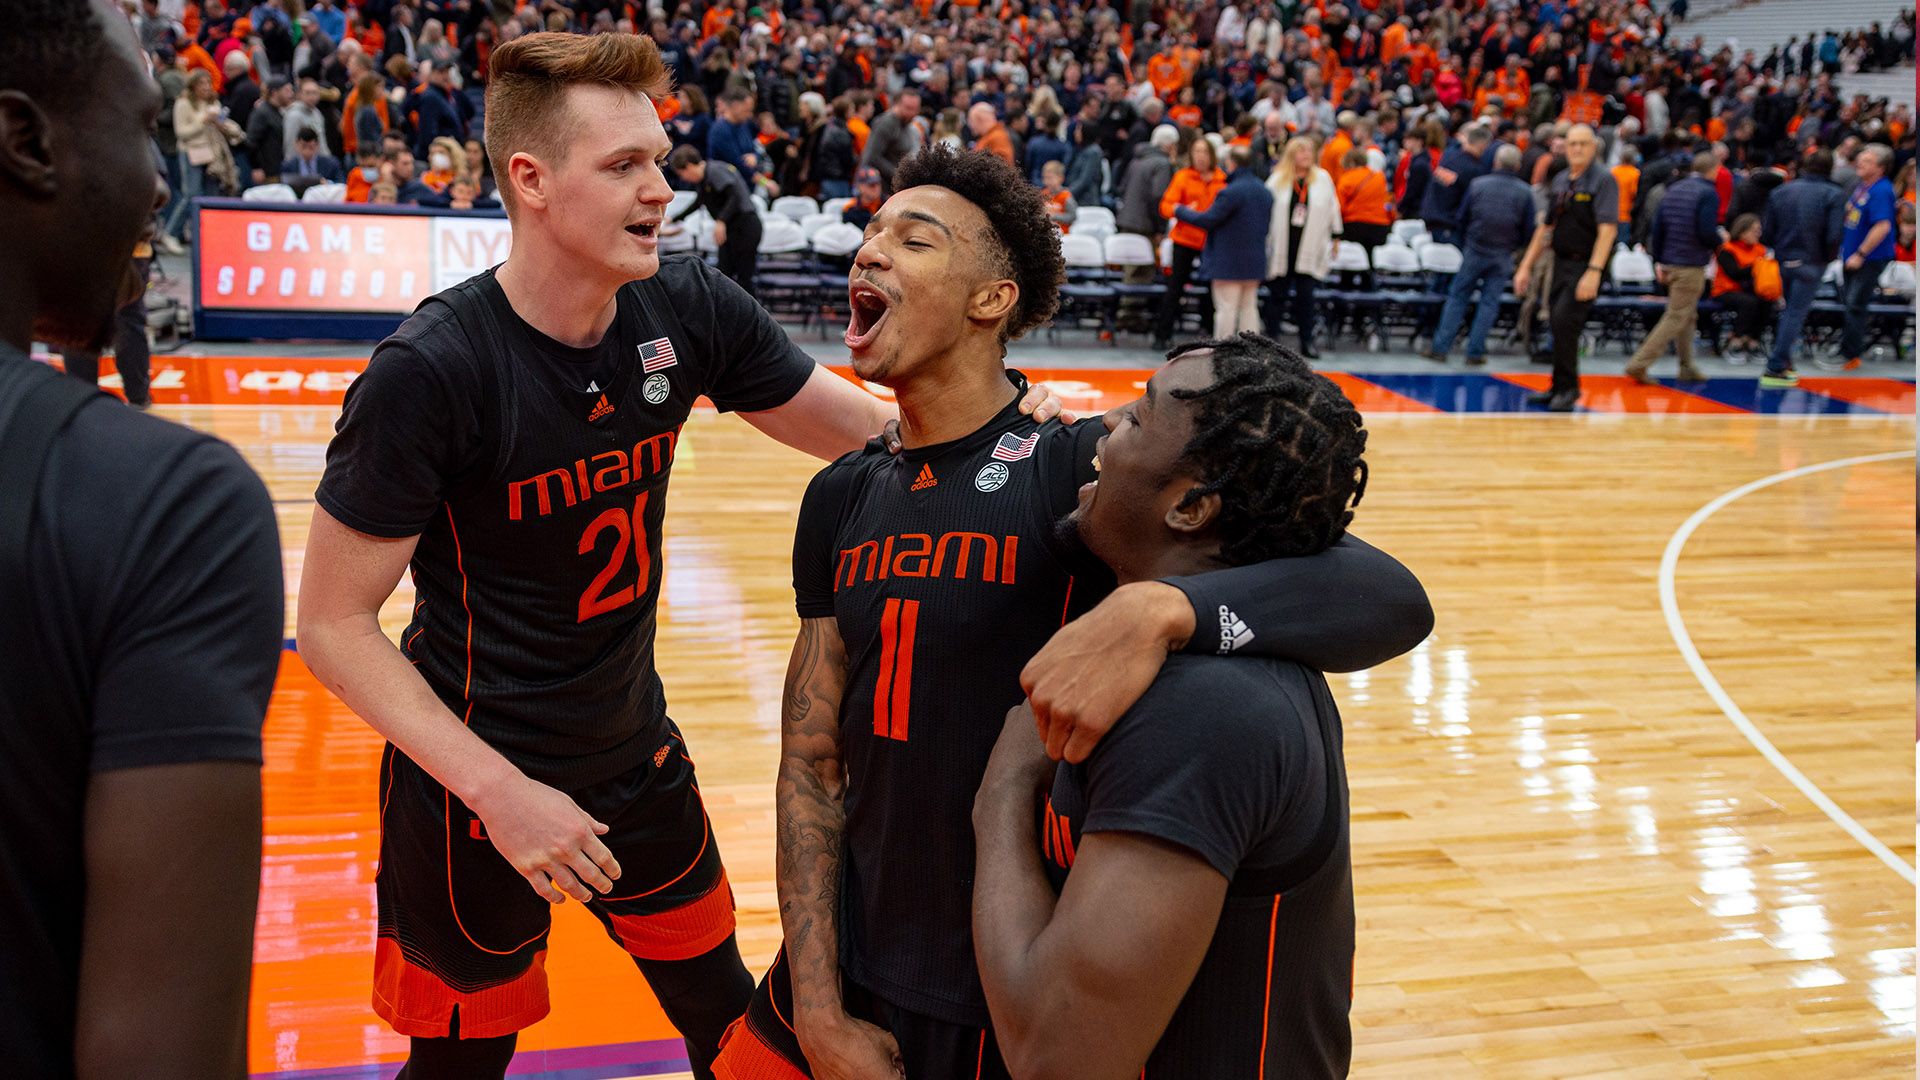 MBB Shocks Syracuse, 75-72, After Trailing by 18 in Second Half